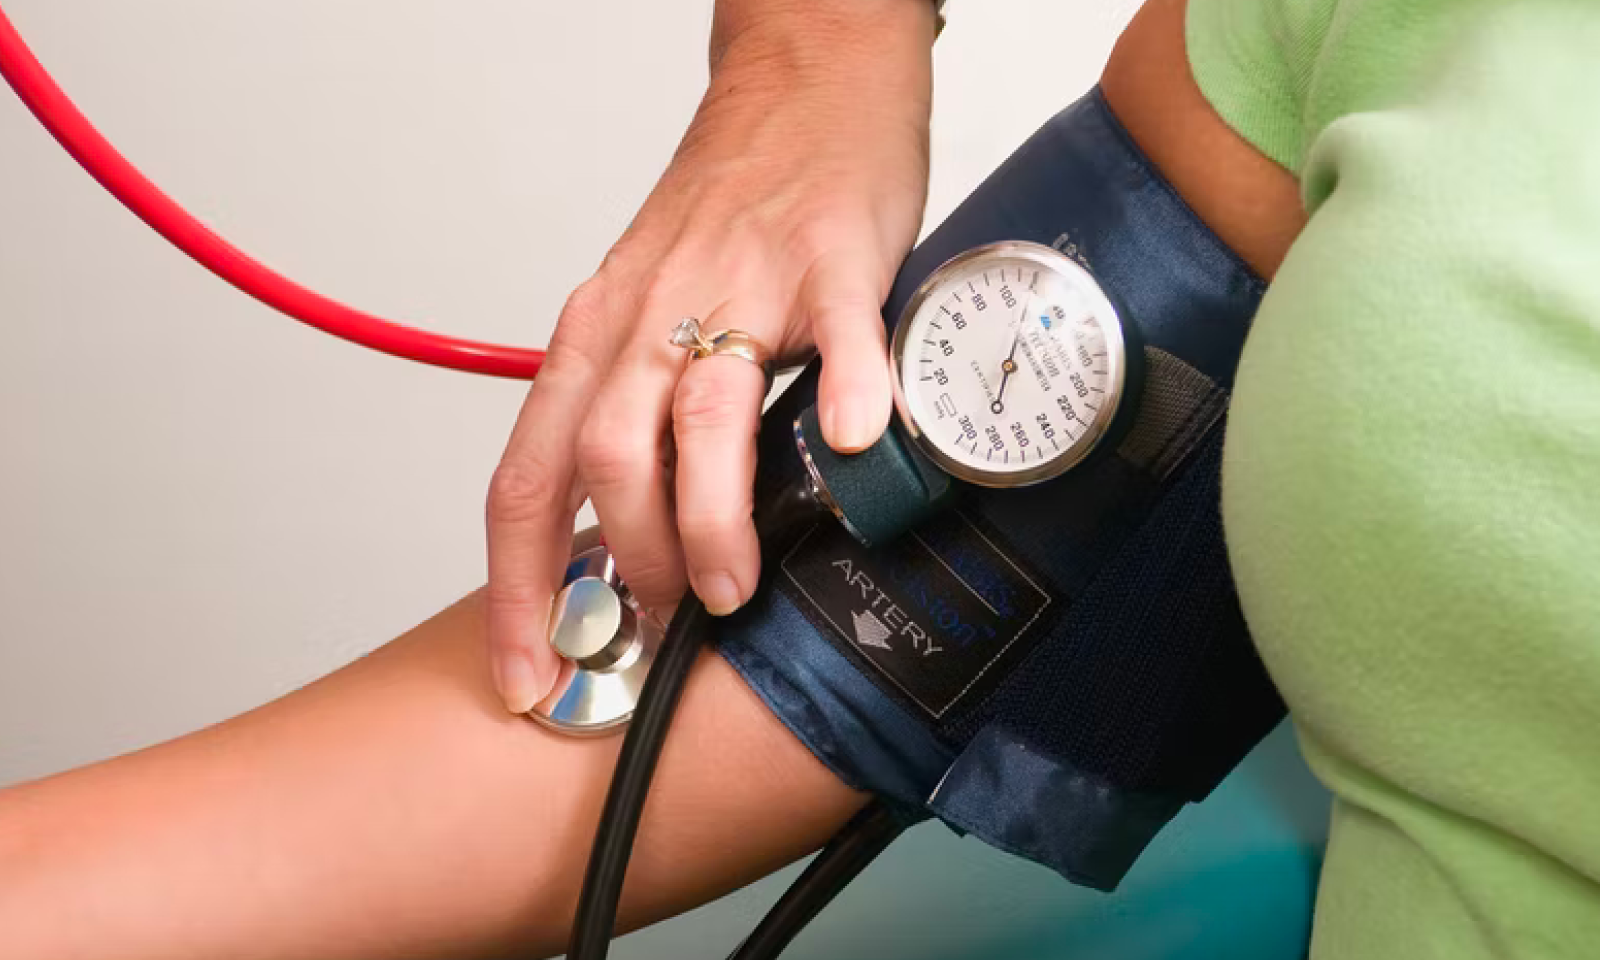 A woman has her blood pressure taken by another person, using a blood pressure monitor band.